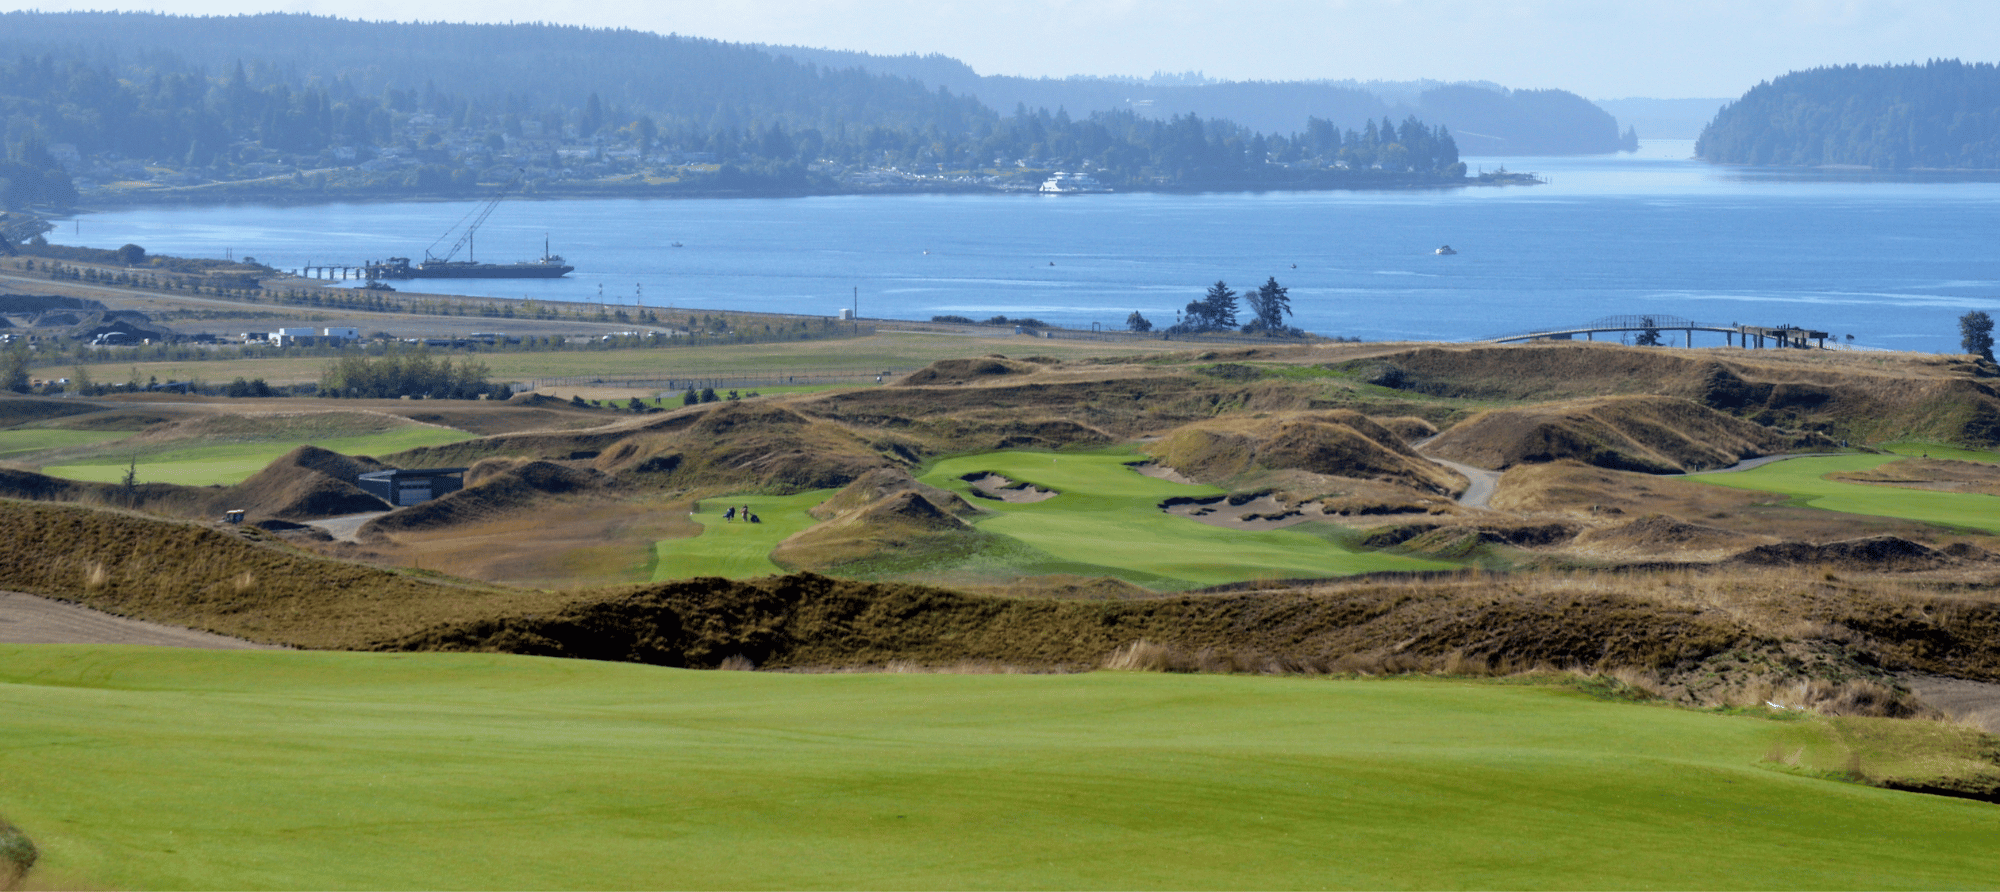 chambers bay golf course overlooking puget sound